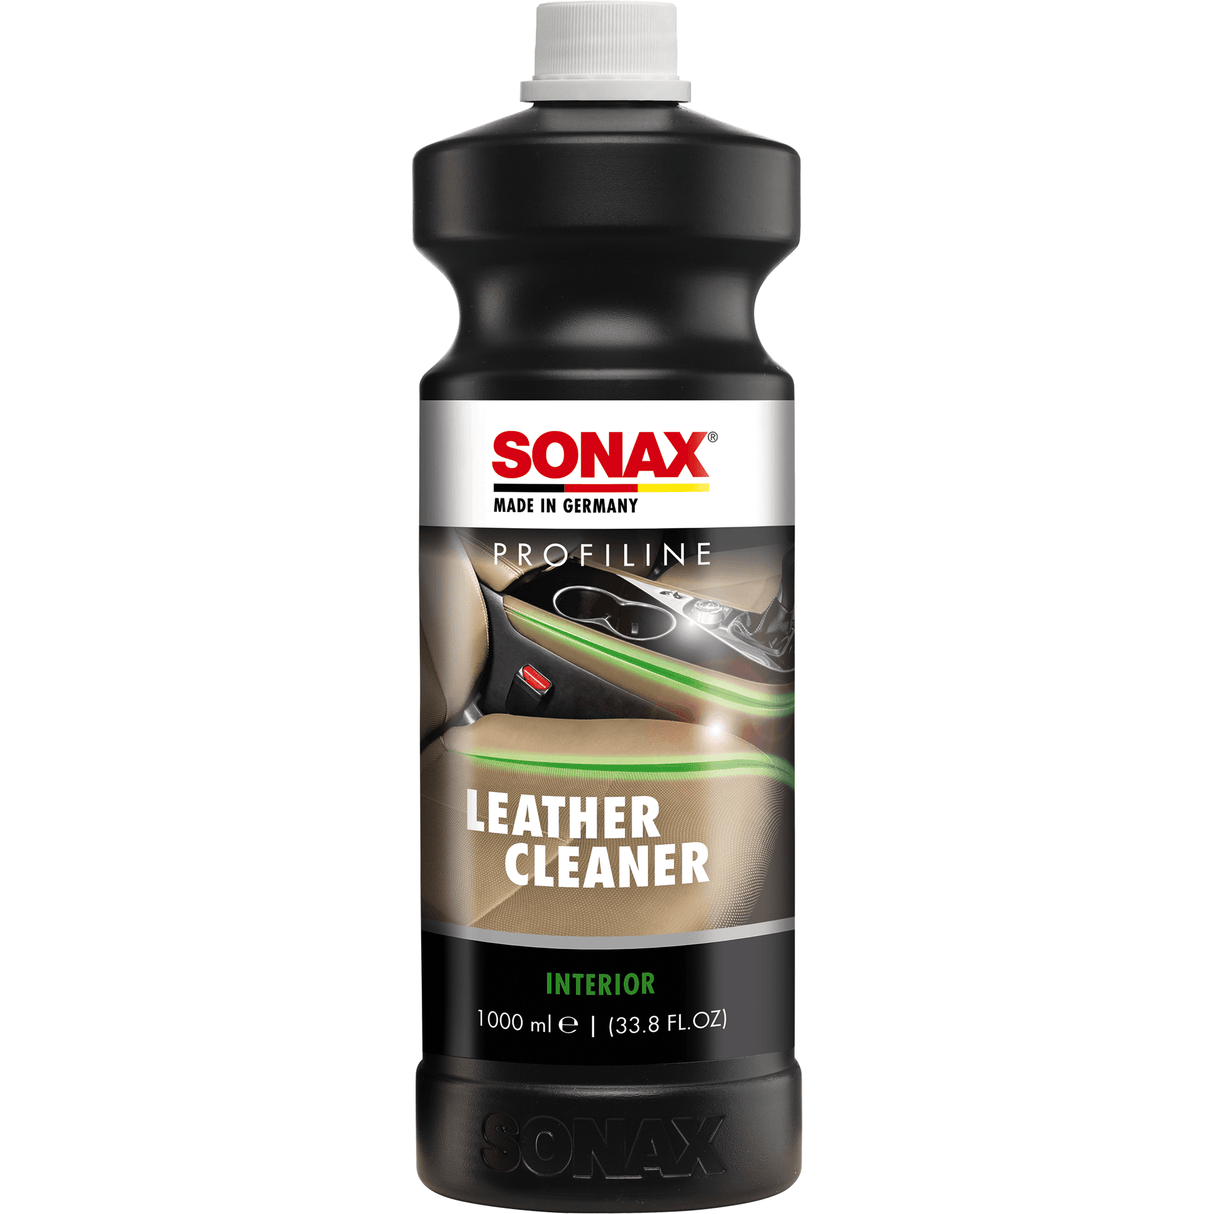 Sonax Profiline Leather Cleaner Foam 1L - Xpert Cleaning